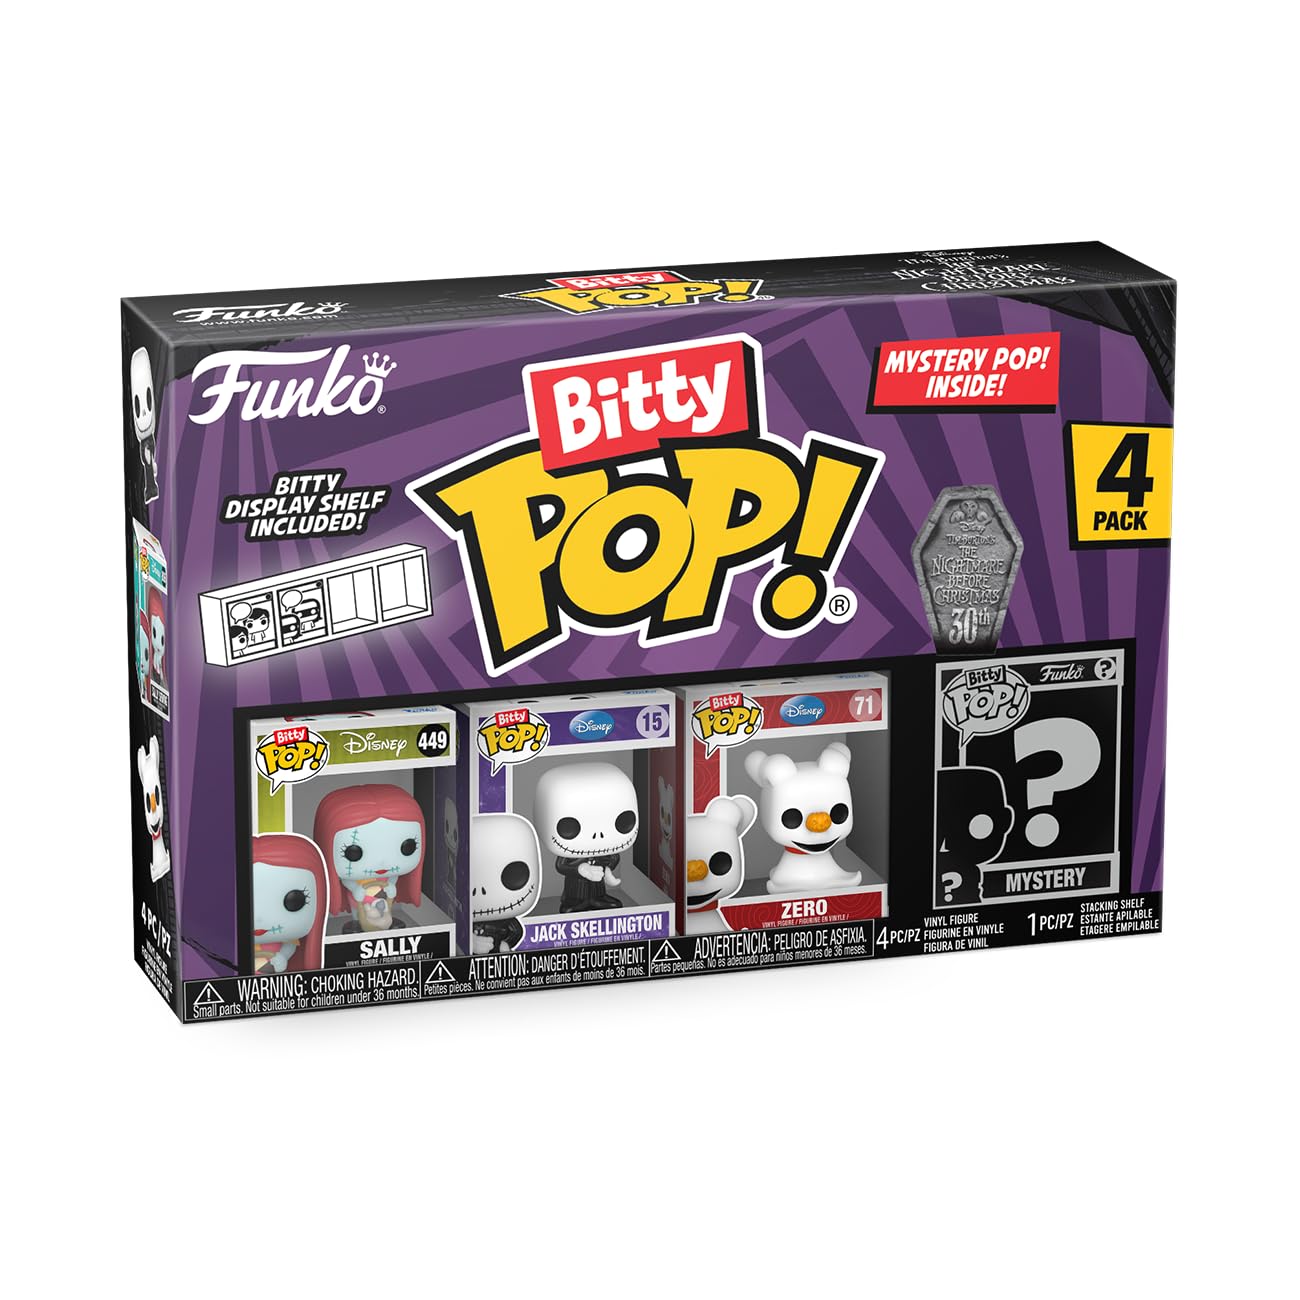 Funko Bitty Pop! The Nightmare Before Christmas Mini Collectible Toys 4-Pack - Sally, Jack Skellington, Zero & Mystery Chase Figure (Styles May Vary) - amzGamess